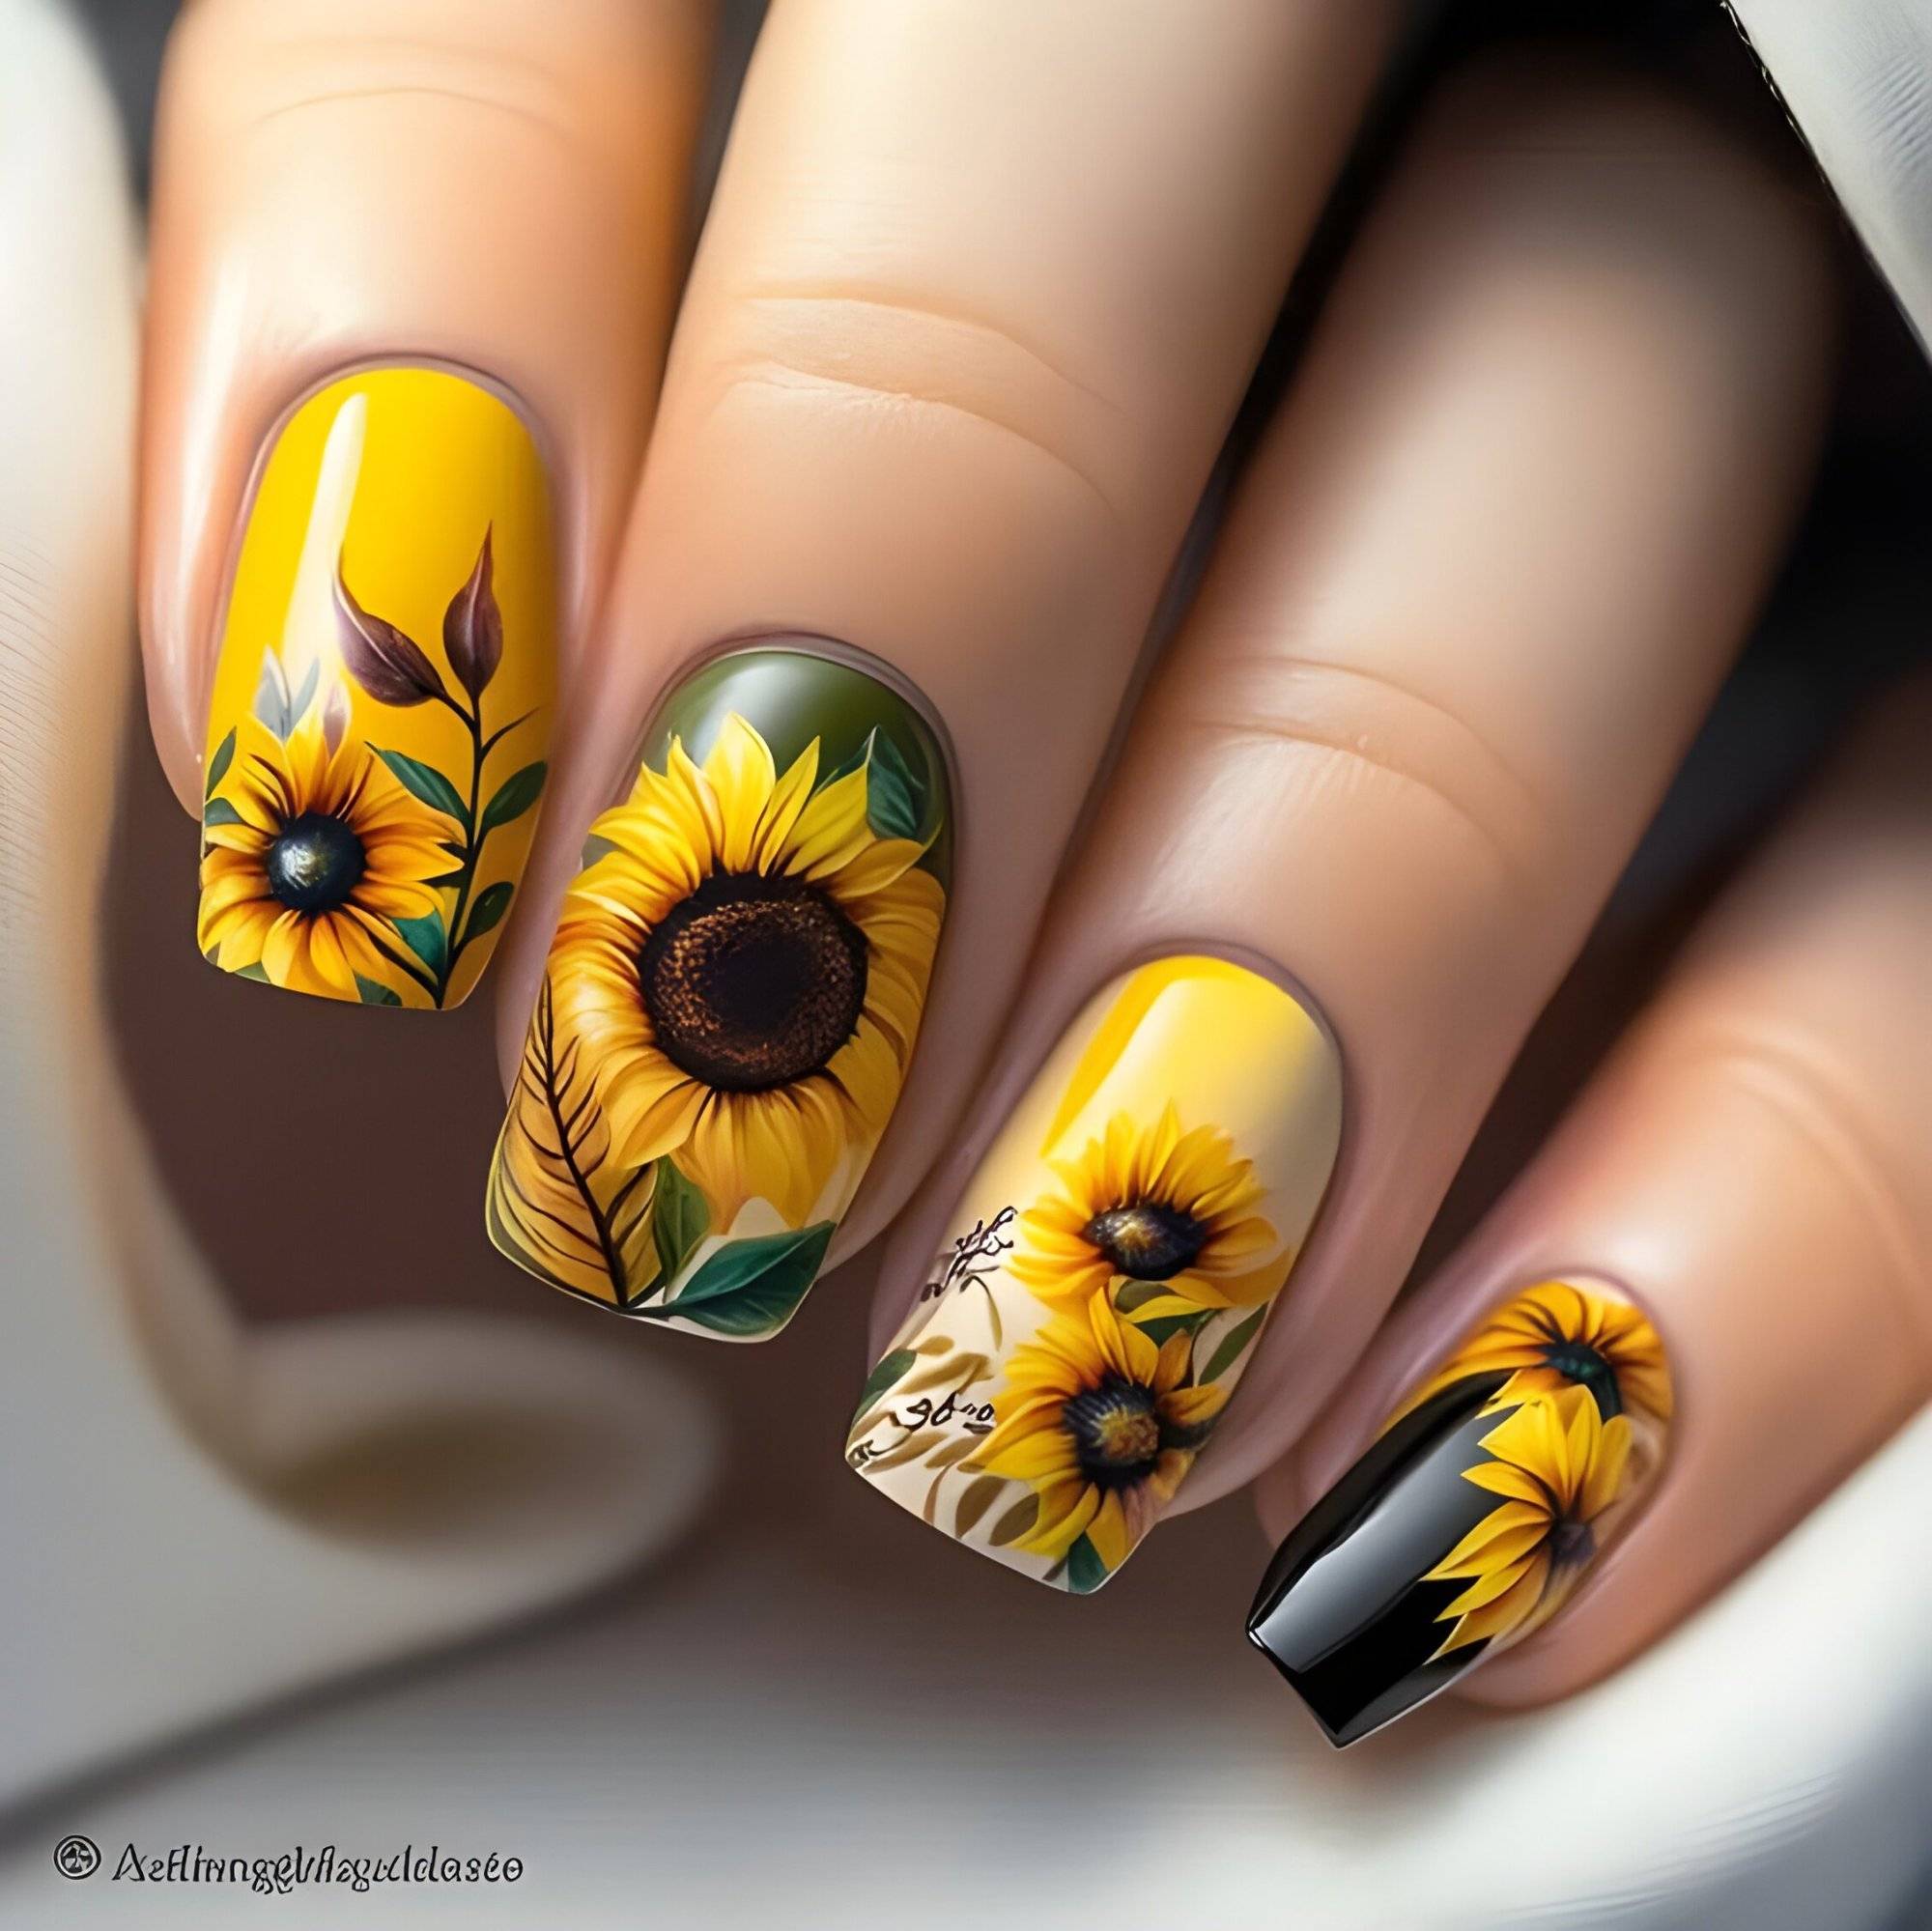 25 Trendy Summer Sunflower Nails For Beginners To Copy ASAP - 183